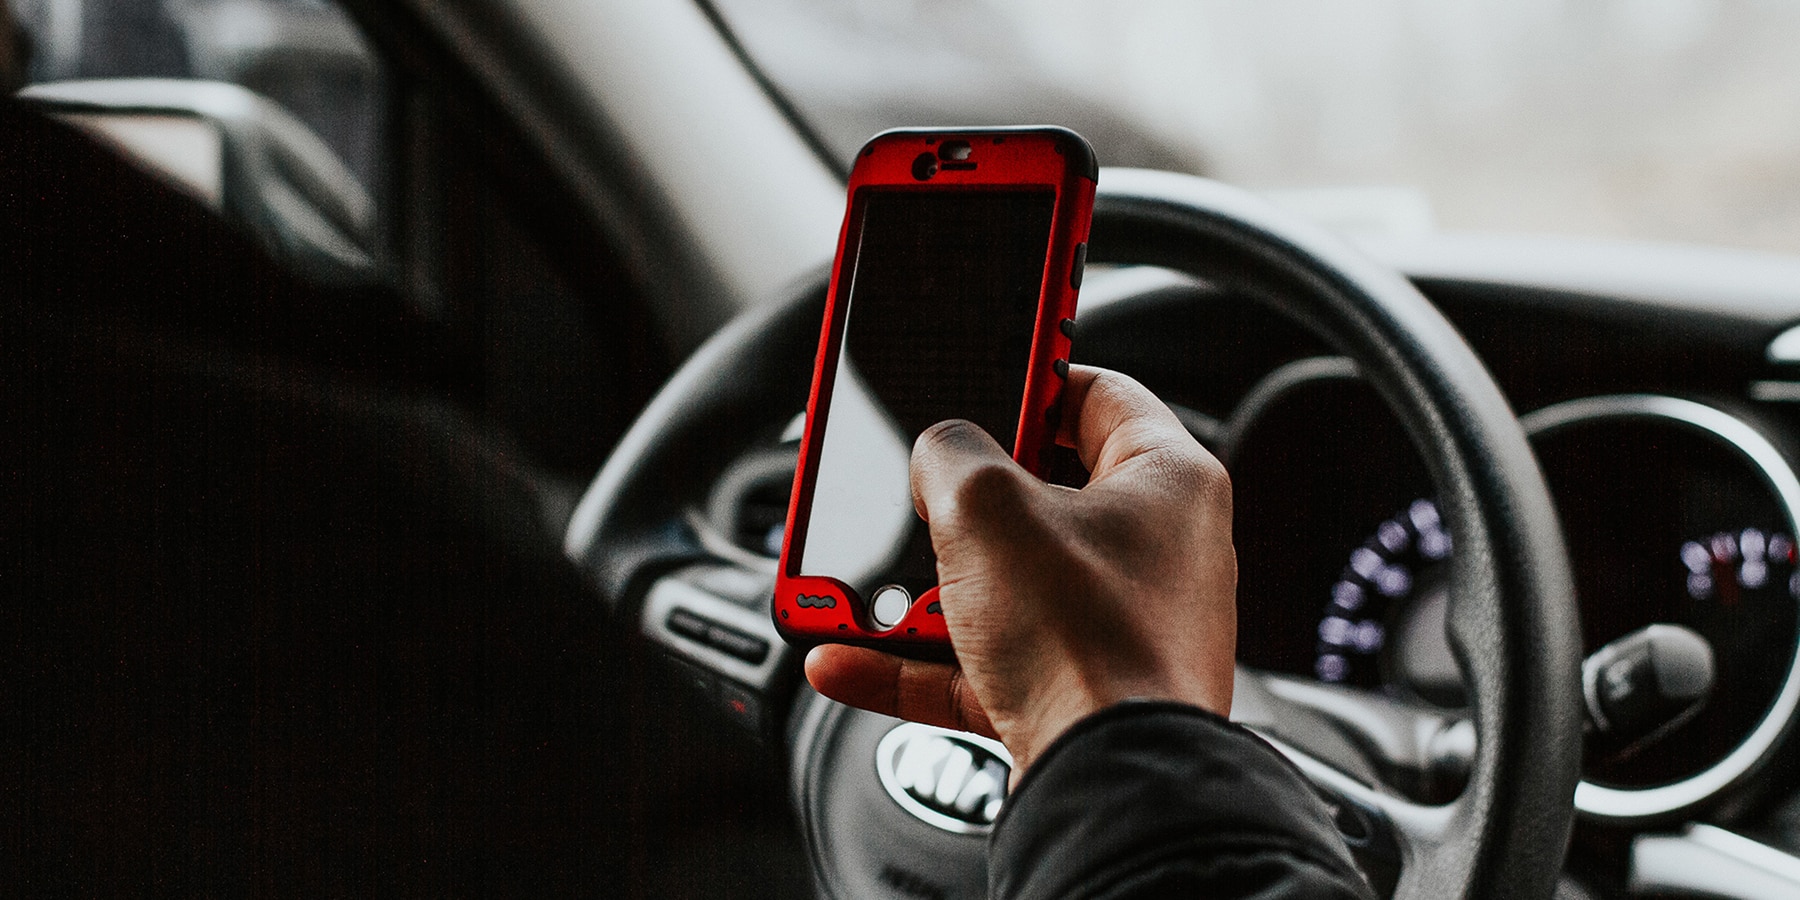 Distracted driving injures 400,000 people and kills 4,000 each year. Here’s how to avoid driving distracted, and save lives.